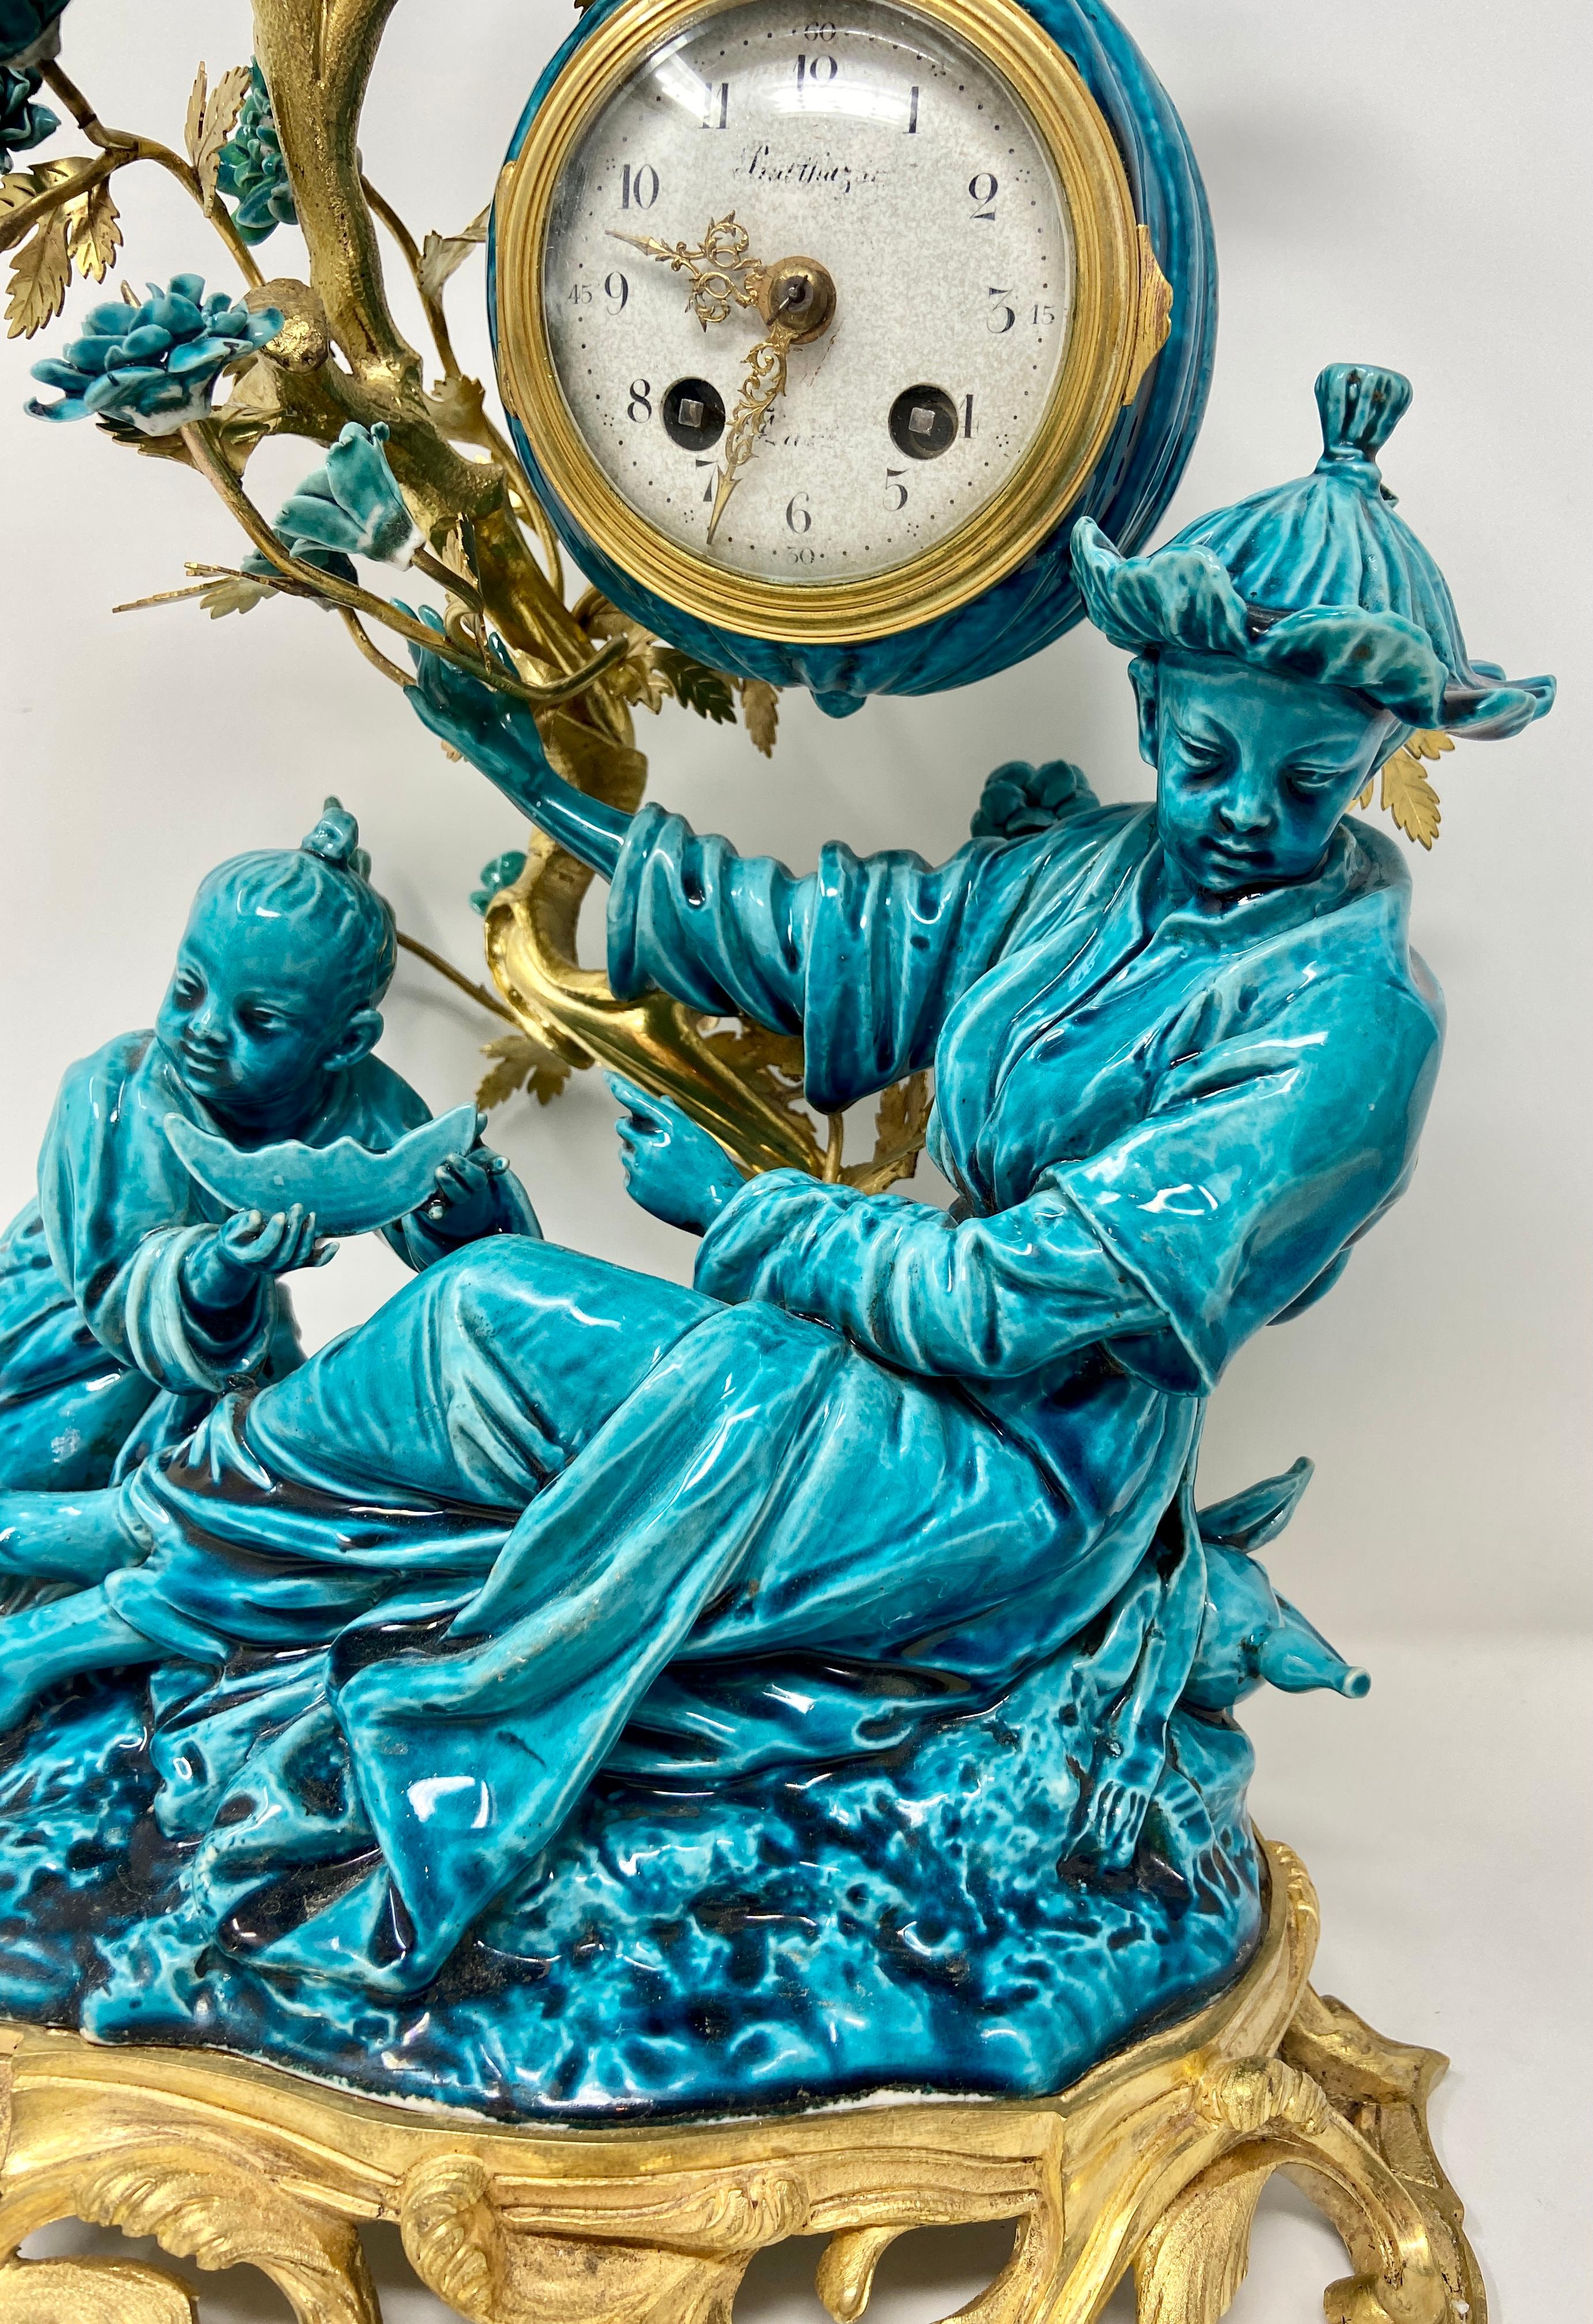 Wonderful Antique French Chinoiserie Style Gold Bronze & Turquoise Glazed Porcelain 3 Piece Garniture Clock Set, Circa 1890's-1900.
Clock: 16 inches in height x 11 inches in width x 9 inches in depth 
Birds: 12 inches in height x 6 inches in width